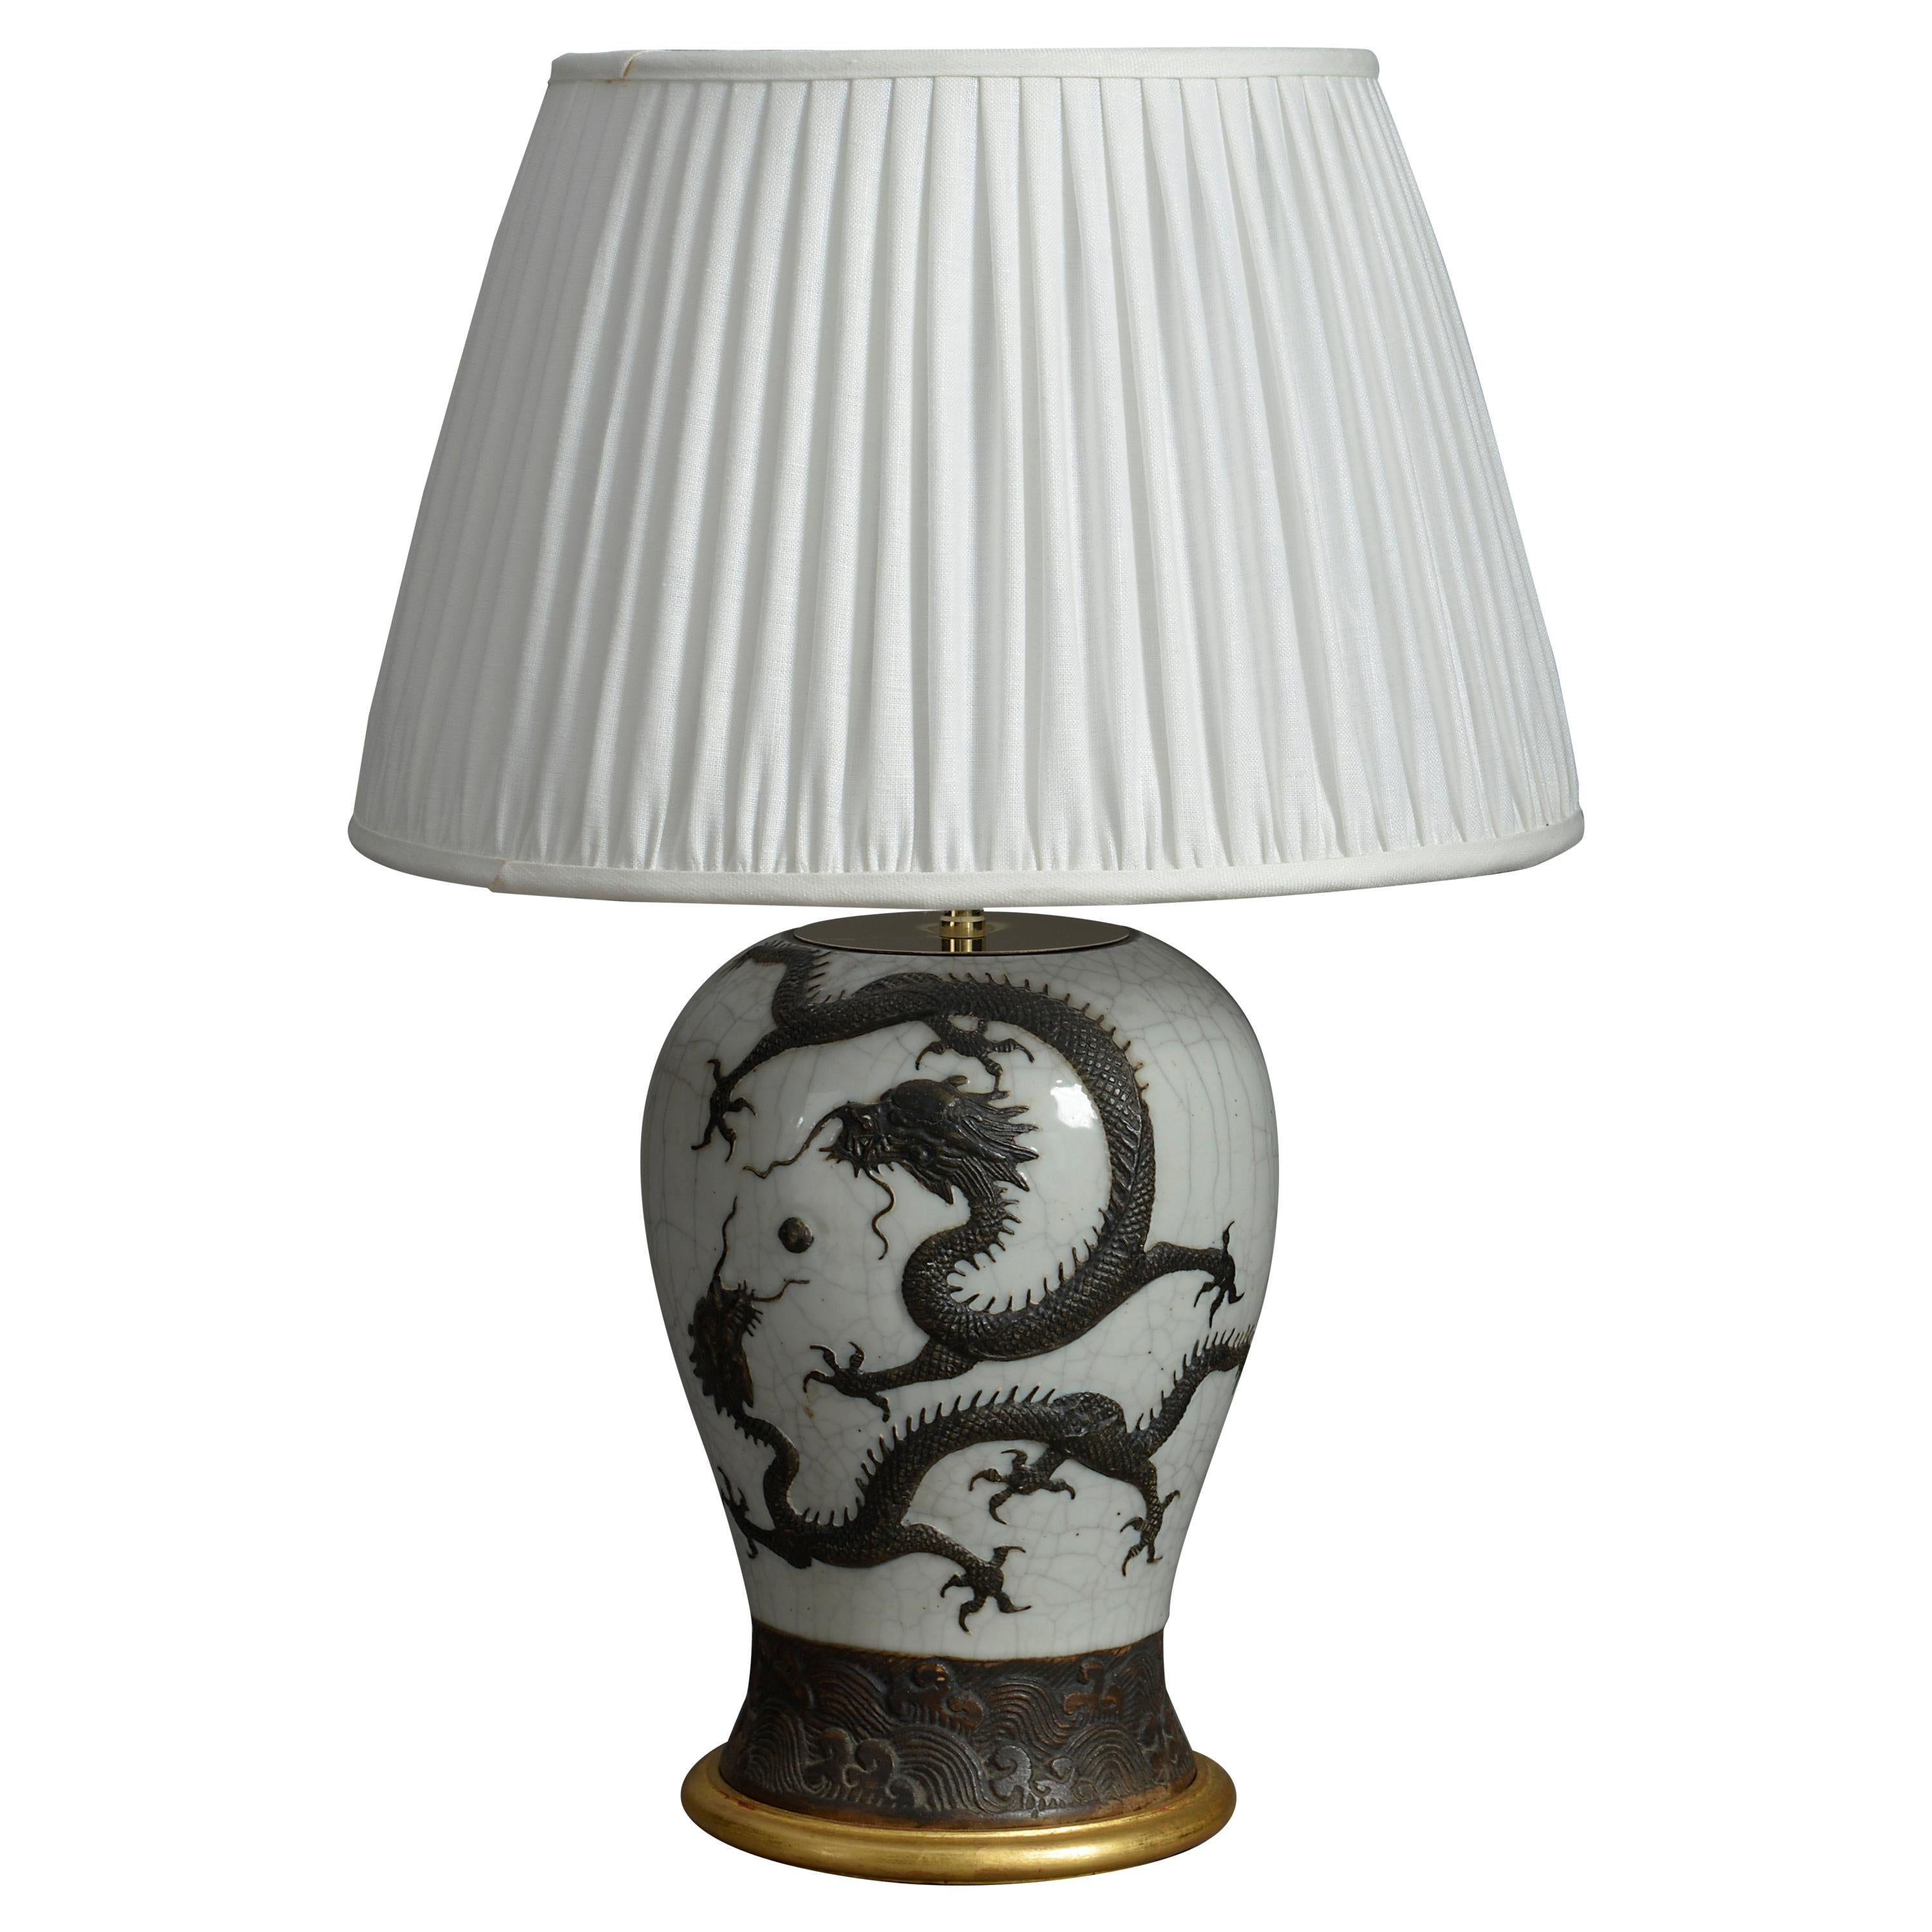 A late 19th century Chinese Export crackle glazed vase, the cream ground with applied bronzed dragon. Set upon a hand-turned giltwood base and mounted as a lamp.

Dimensions refer to porcelain vase and giltwood base only

Shade not included.